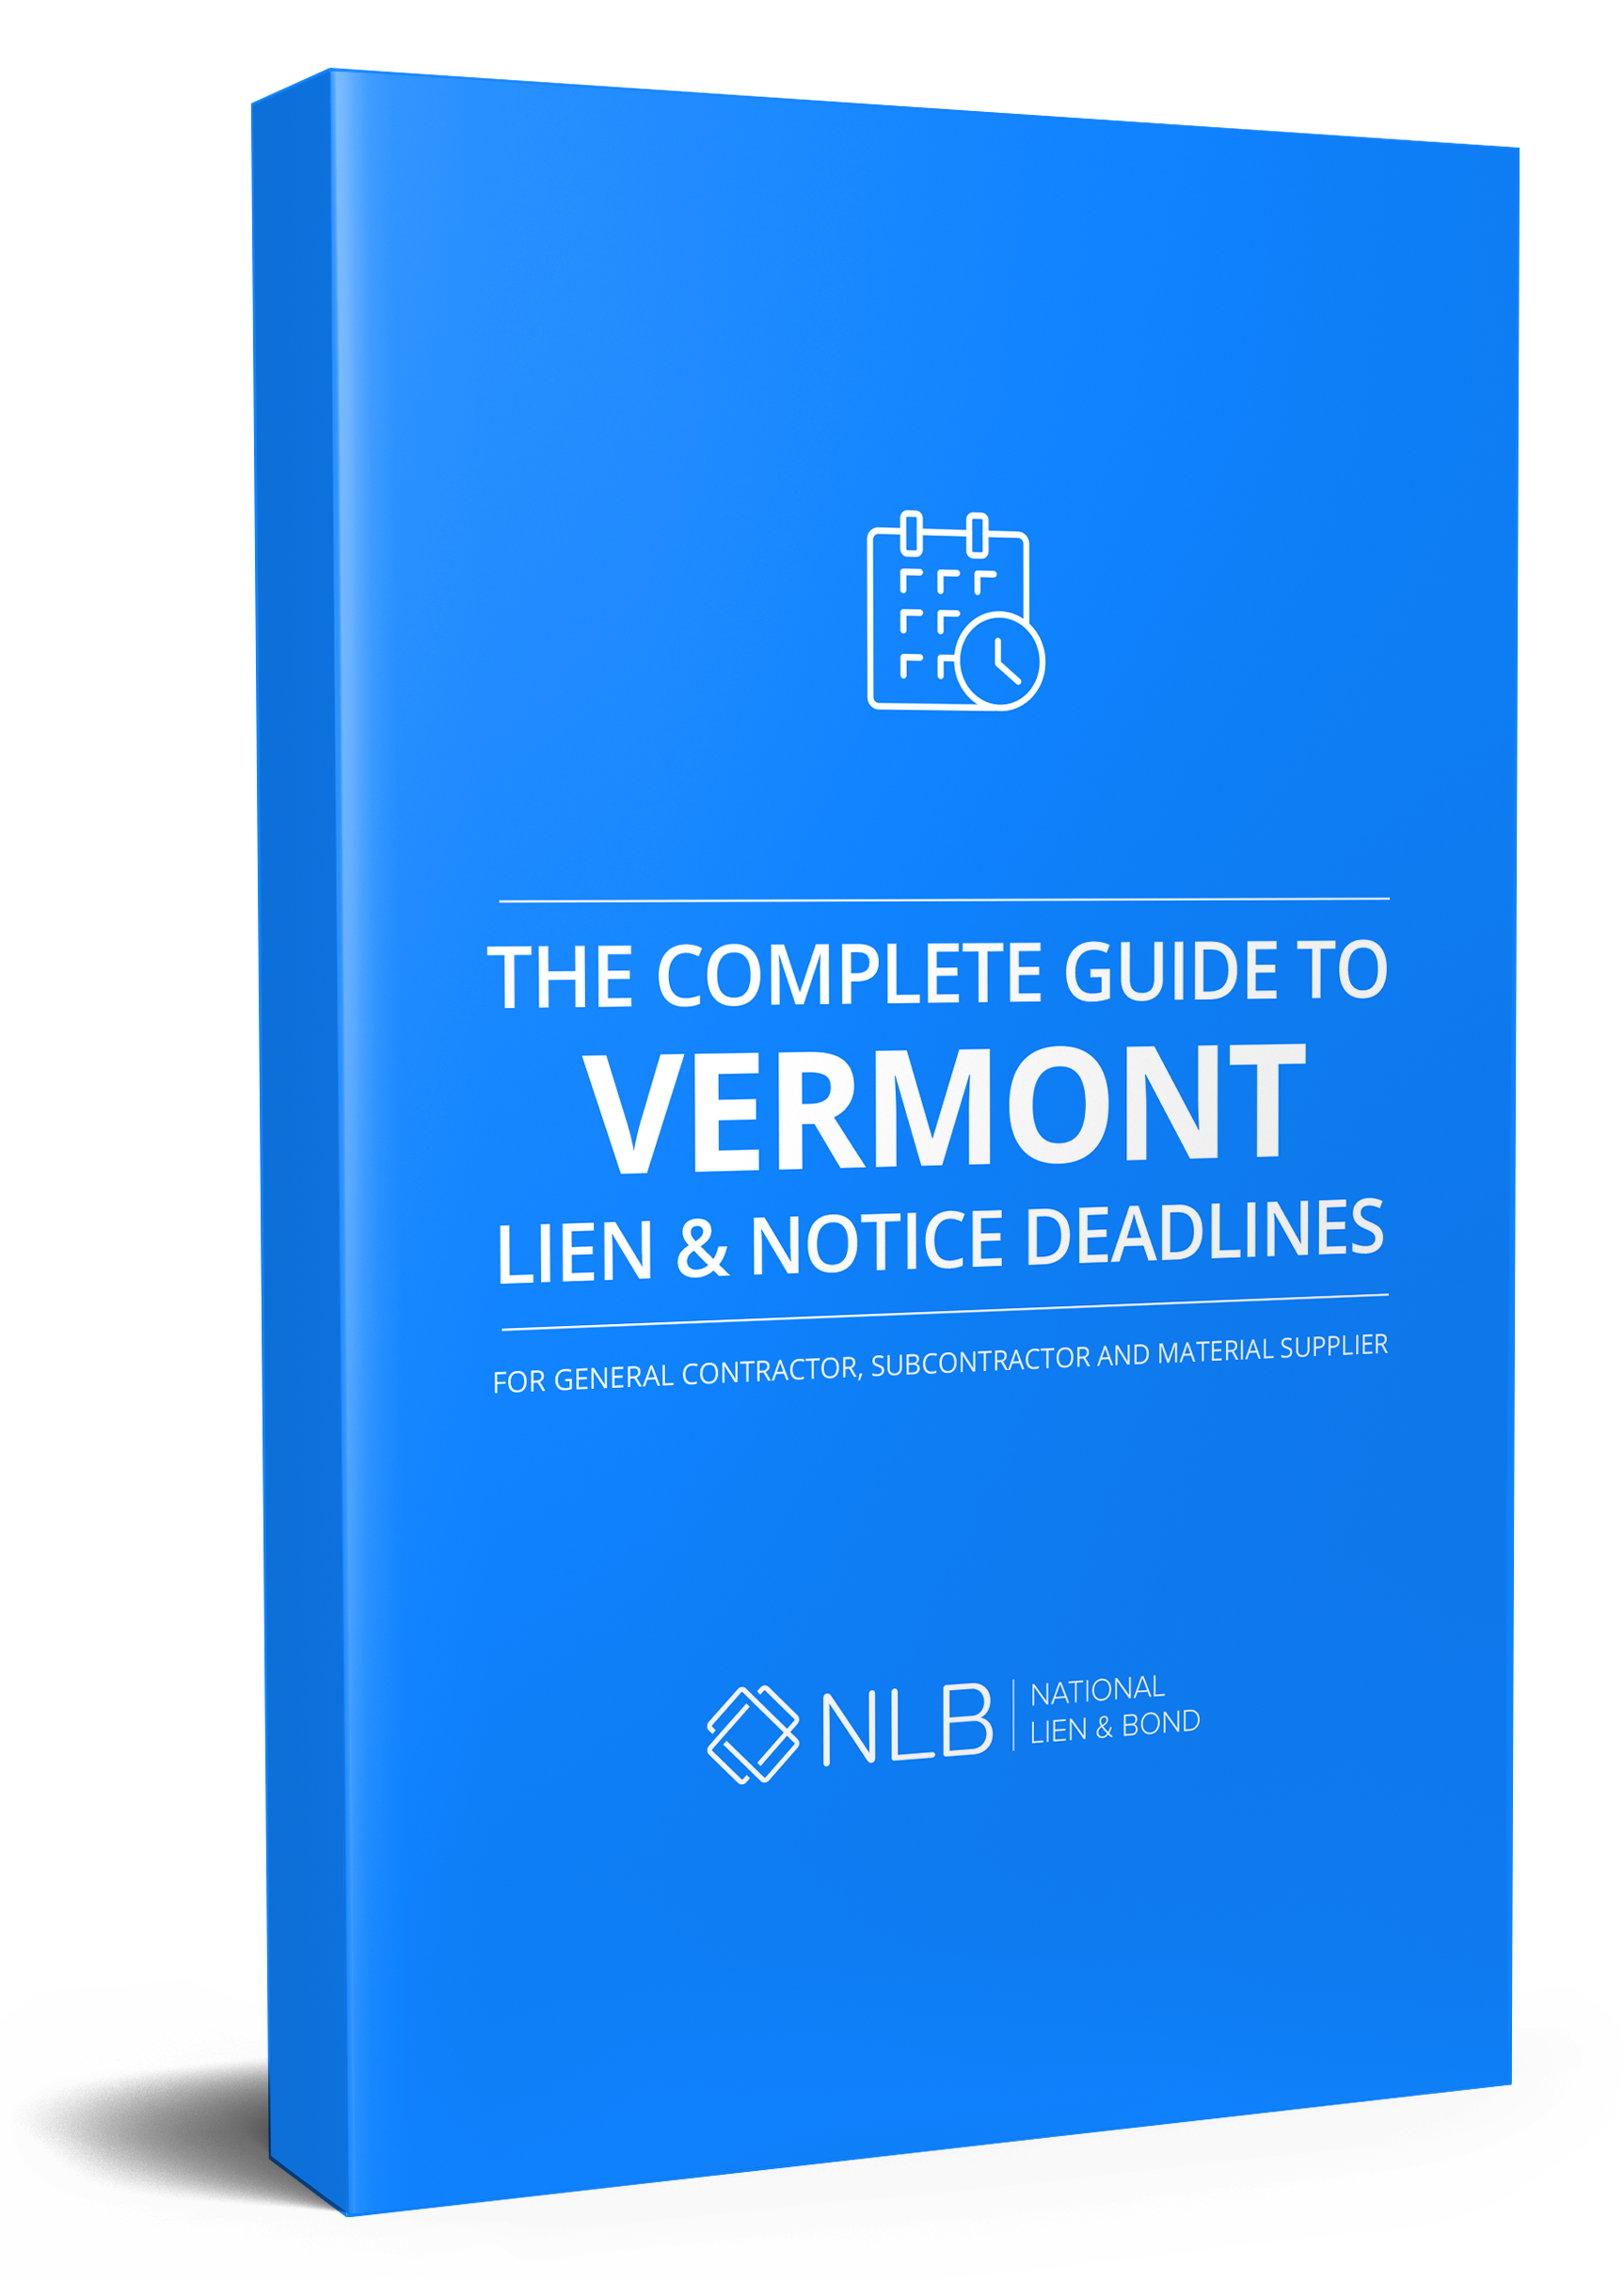 vermont_Mockup.png